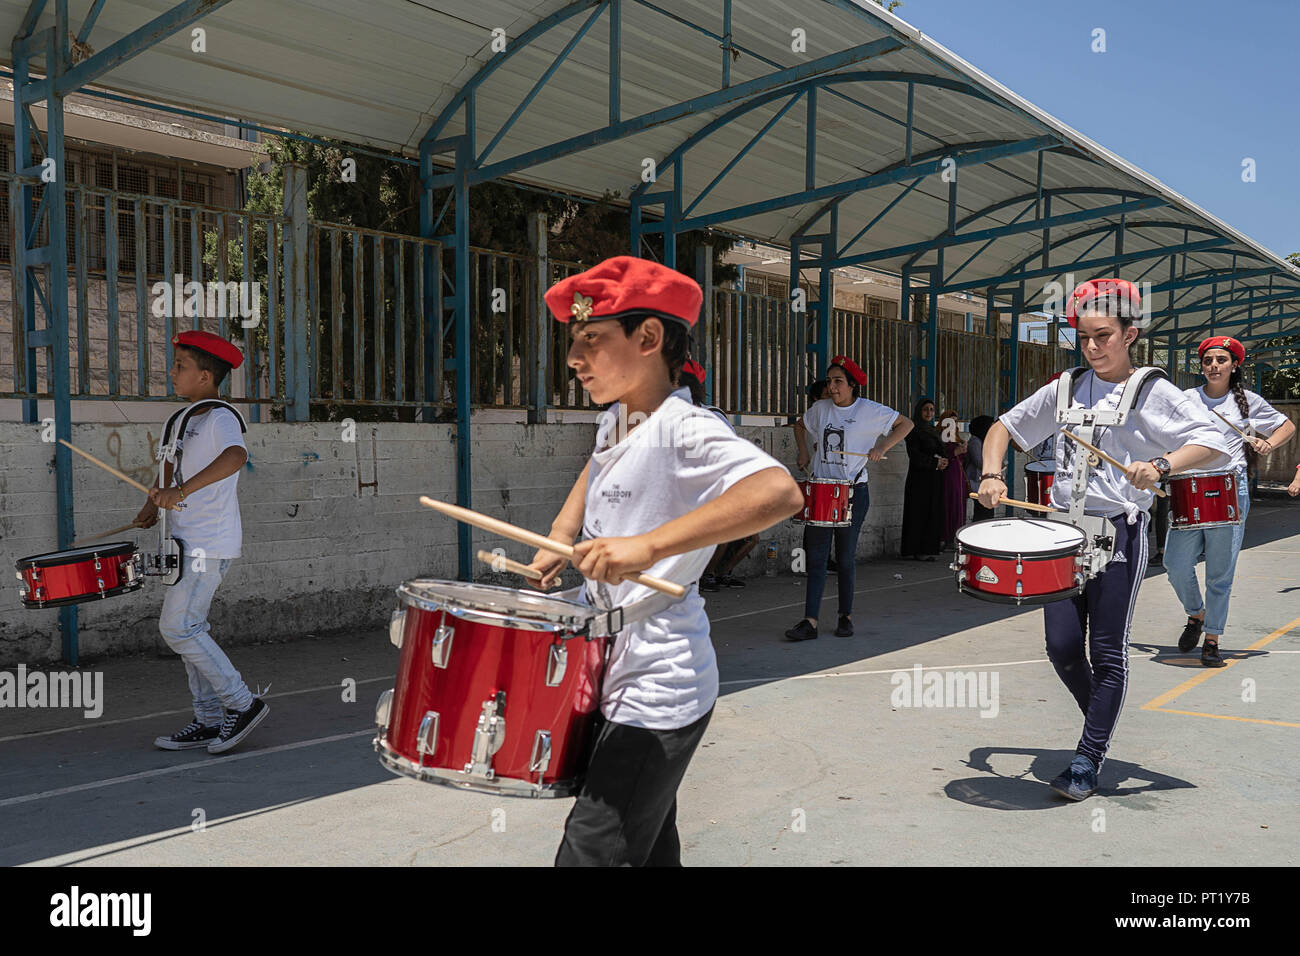 Bethlehem, Palestine. 13th Feb, 2018. The band seen playing during the summer camp.The Return Summer Camp was organised for children of the Aida refugee camp, it was established in 1950 by the Palestinians who were expelled from their homes from 27 towns throughout Palestine, namely Nasra, Tabaria, Jerusalem, Acre, Jaffa, Haifa and Hebron. This is a 4th generation of refugees, 130 children ranging from 4 to 16 years of age being overlooked by 20 instructors and volunteers and it was funded by the UN until 2000. Credit: Enzo Tomasiello/SOPA Images/ZUMA Wire/Alamy Live News Stock Photo